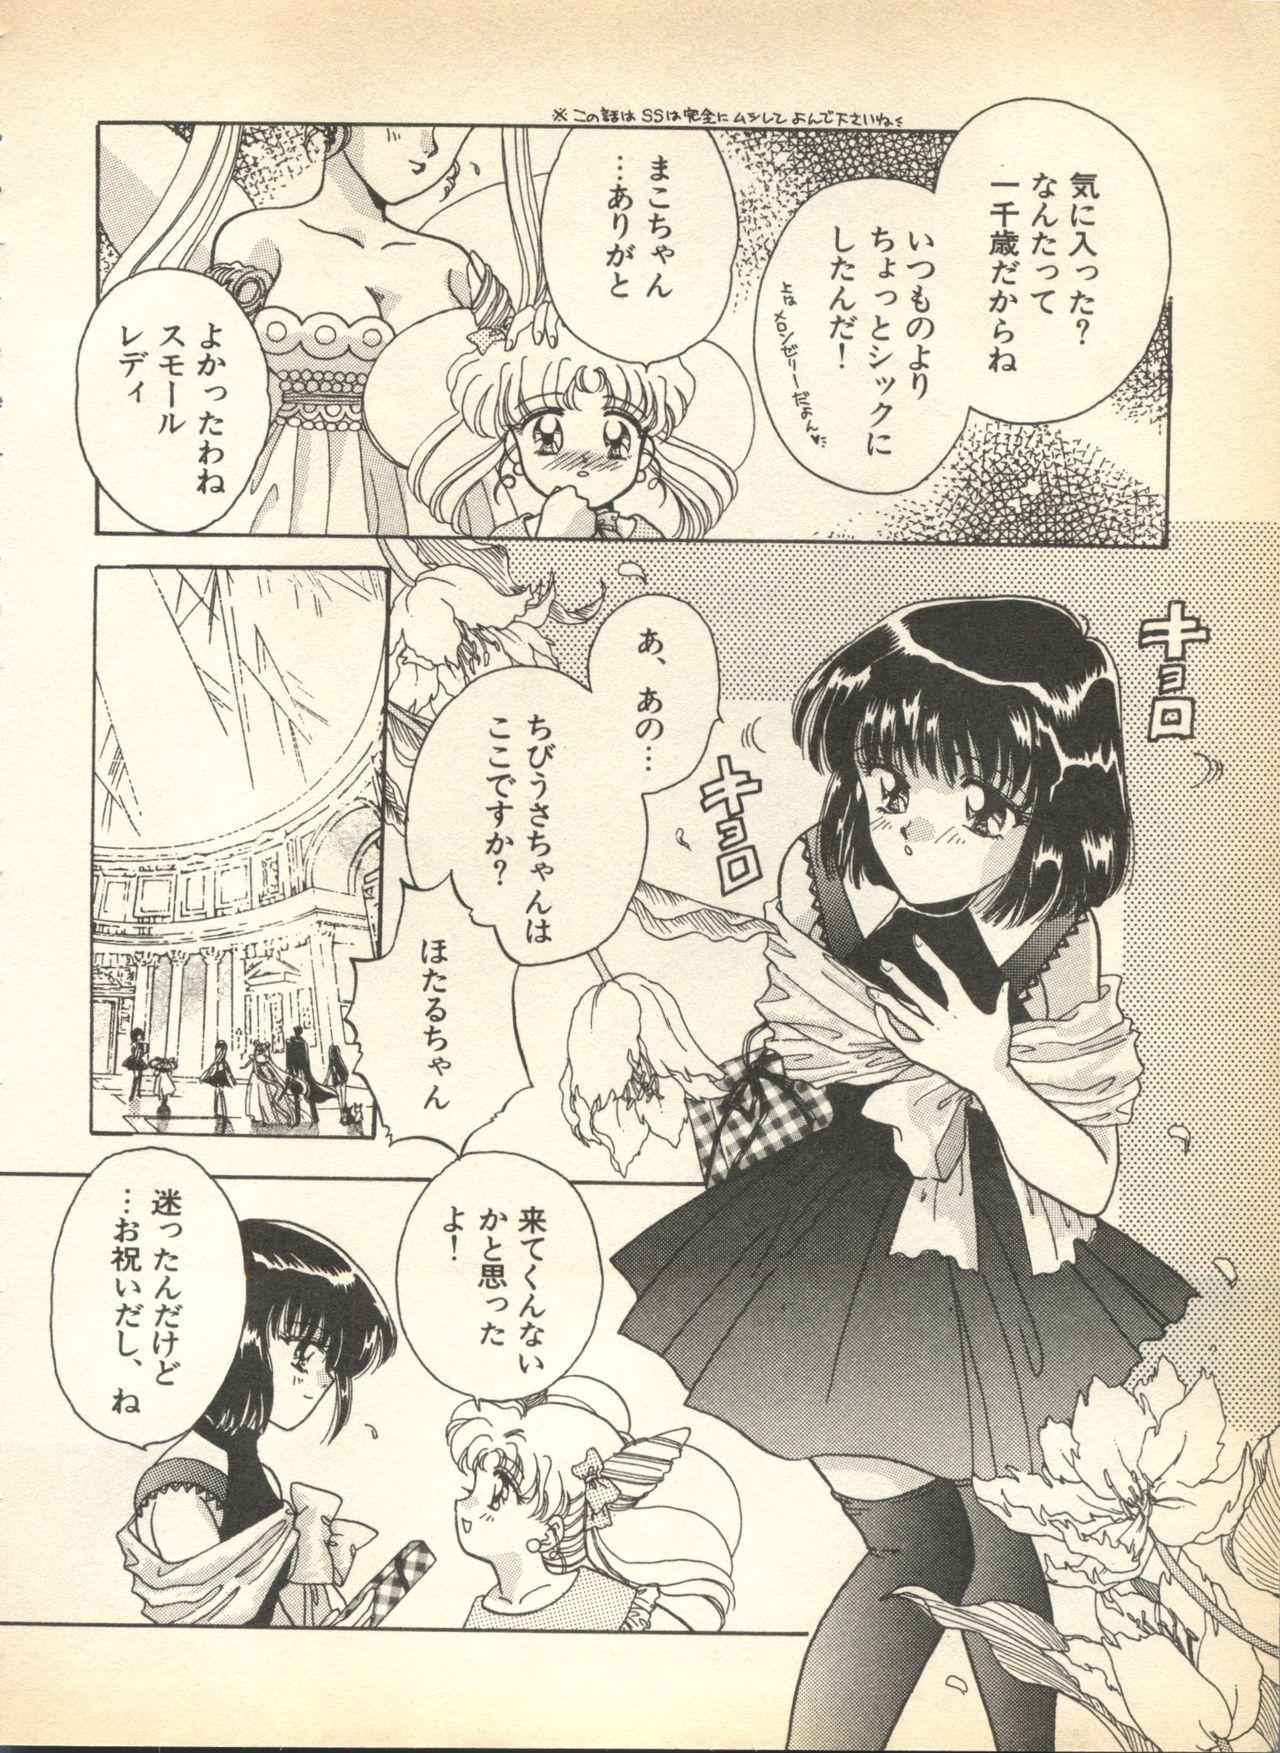 Brazilian Lunatic Party 8 - Sailor moon Married - Page 8